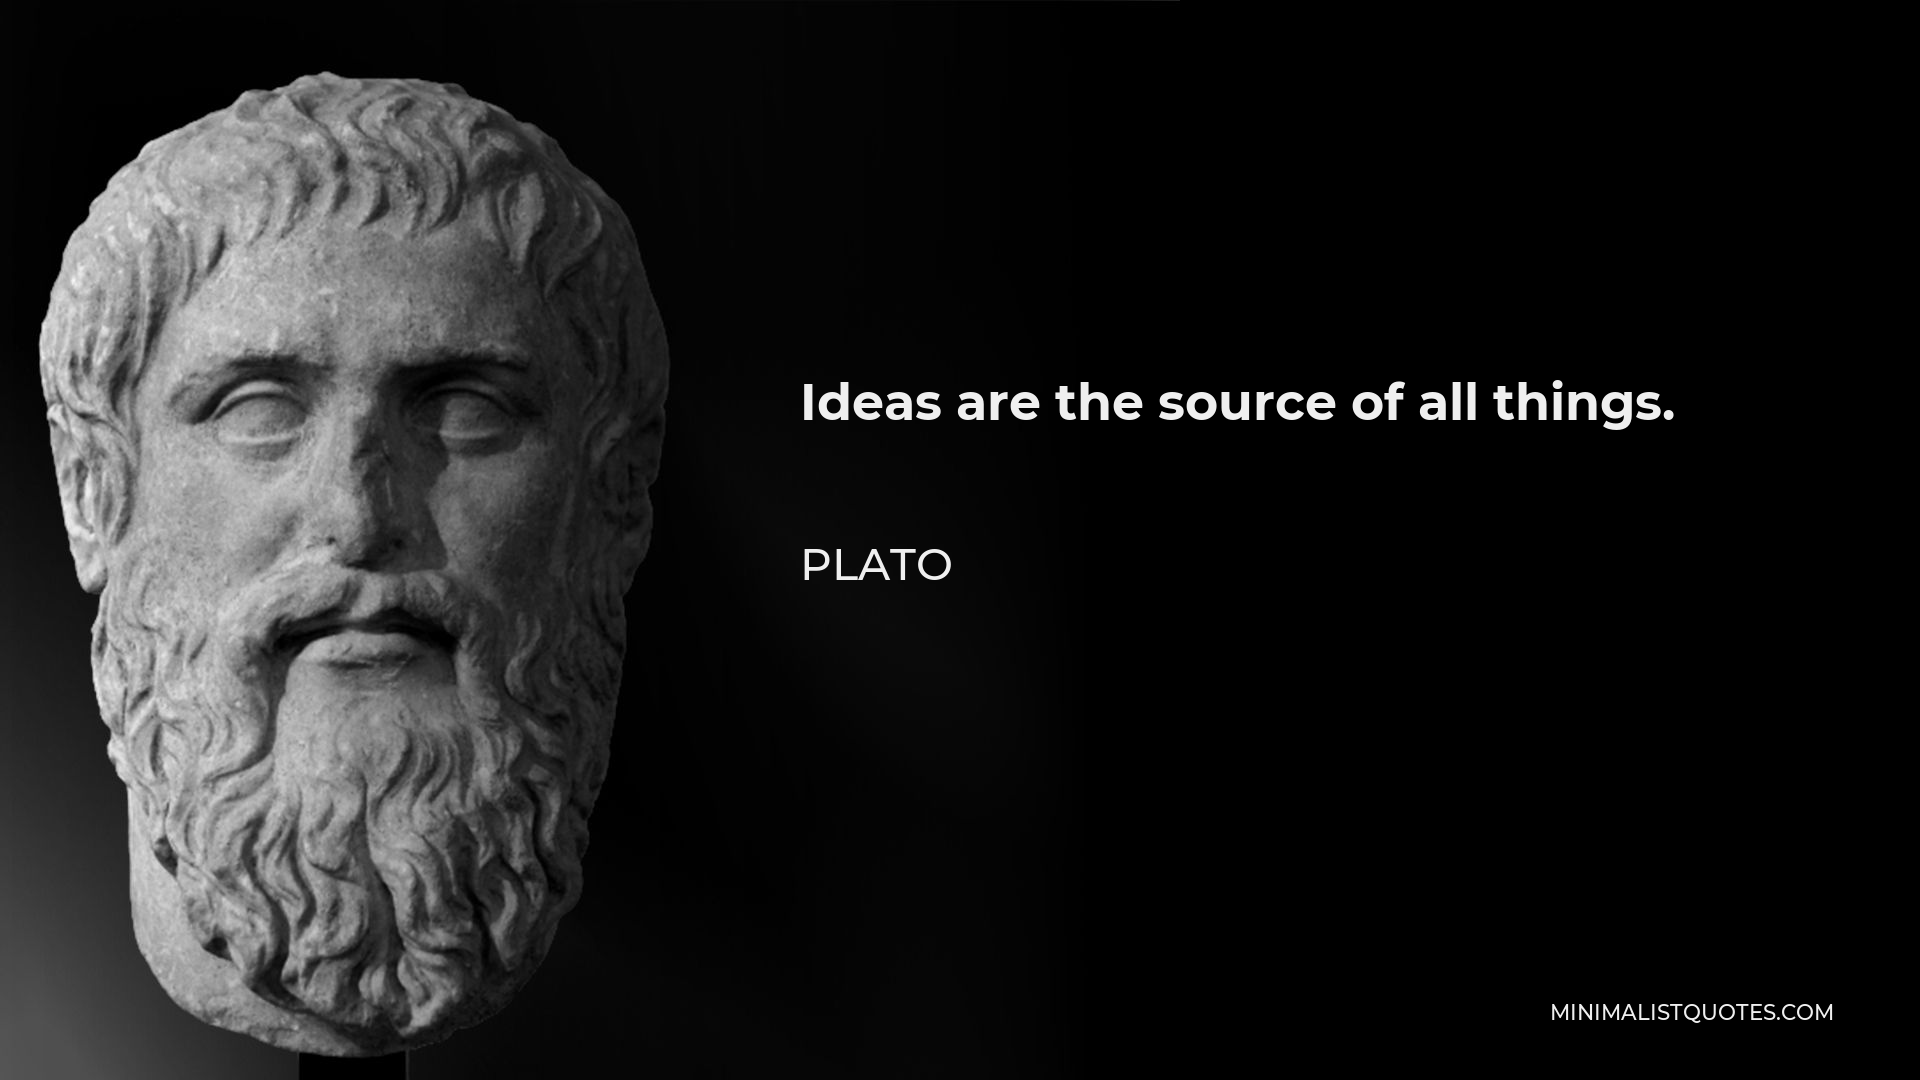 Plato Quote - Ideas are the source of all things.